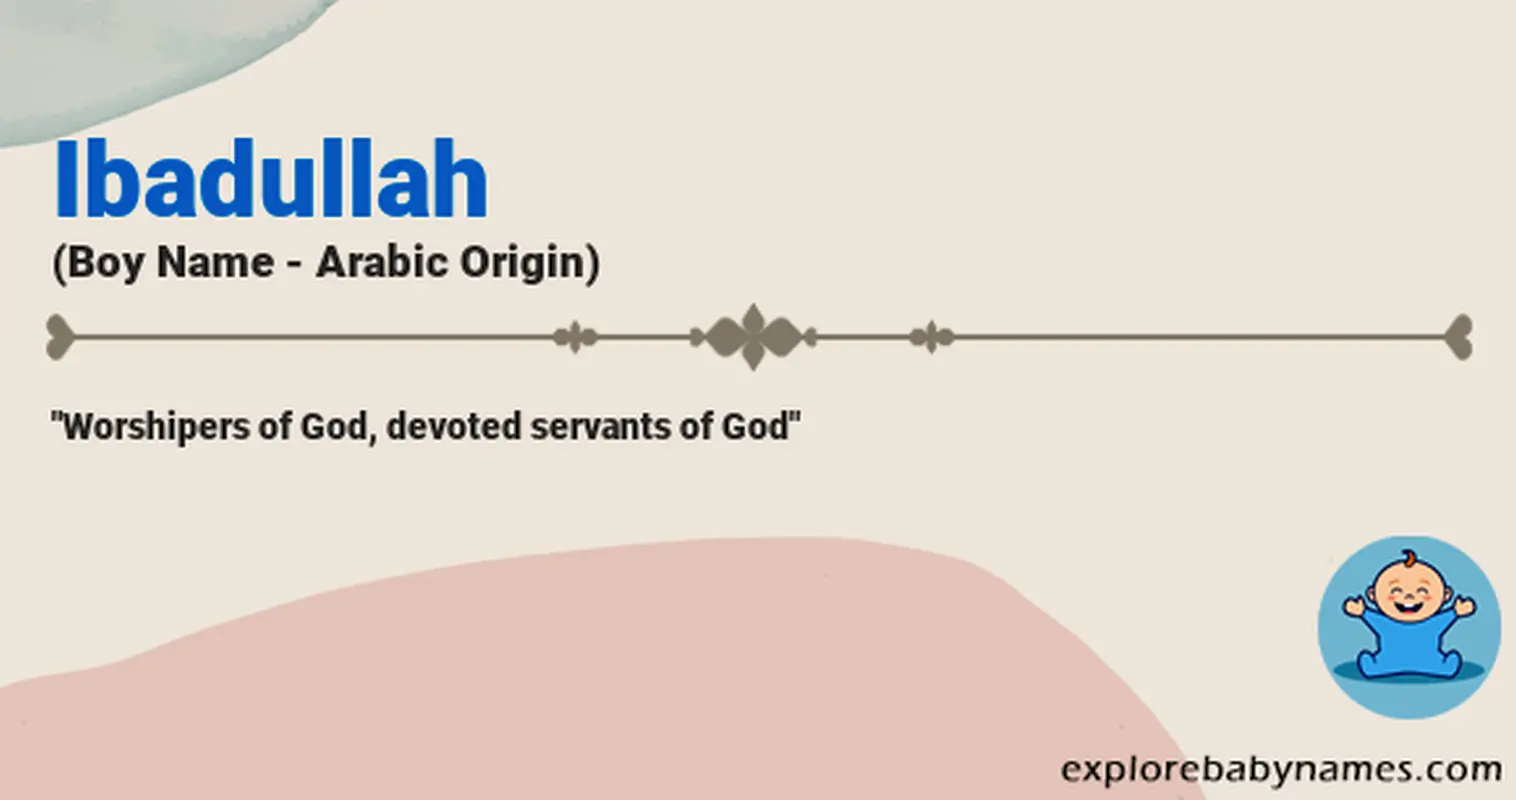 Meaning of Ibadullah